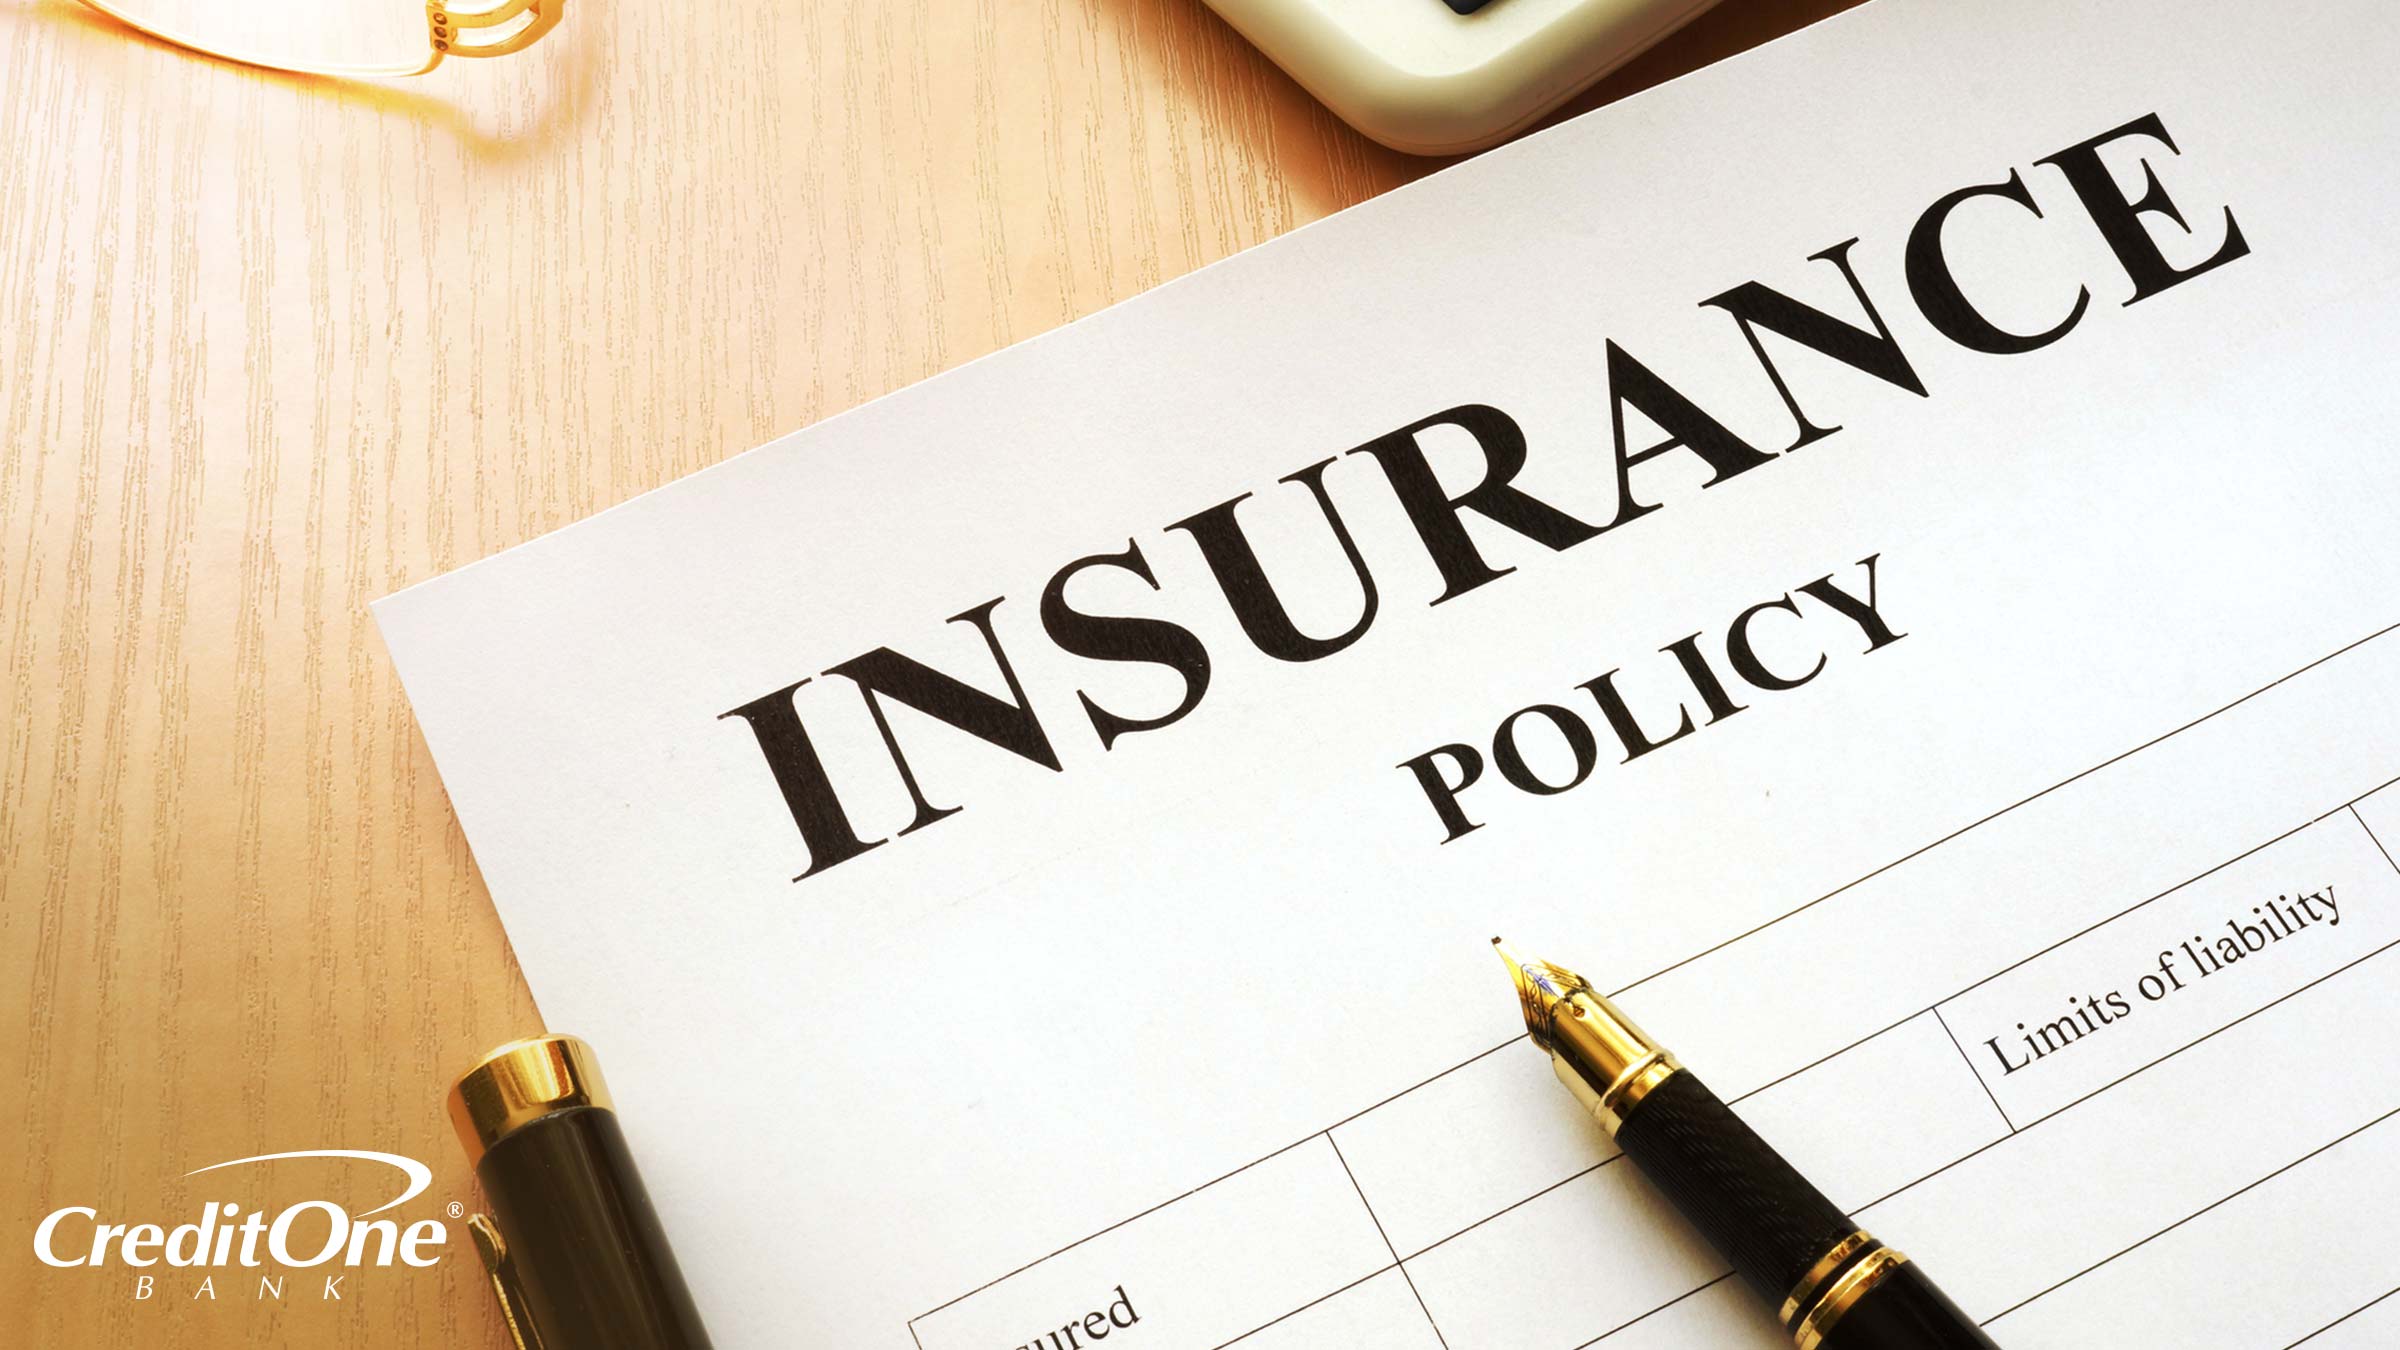 An insurance policy on a desk outlines the insured, limits of liability, and other terms you should know